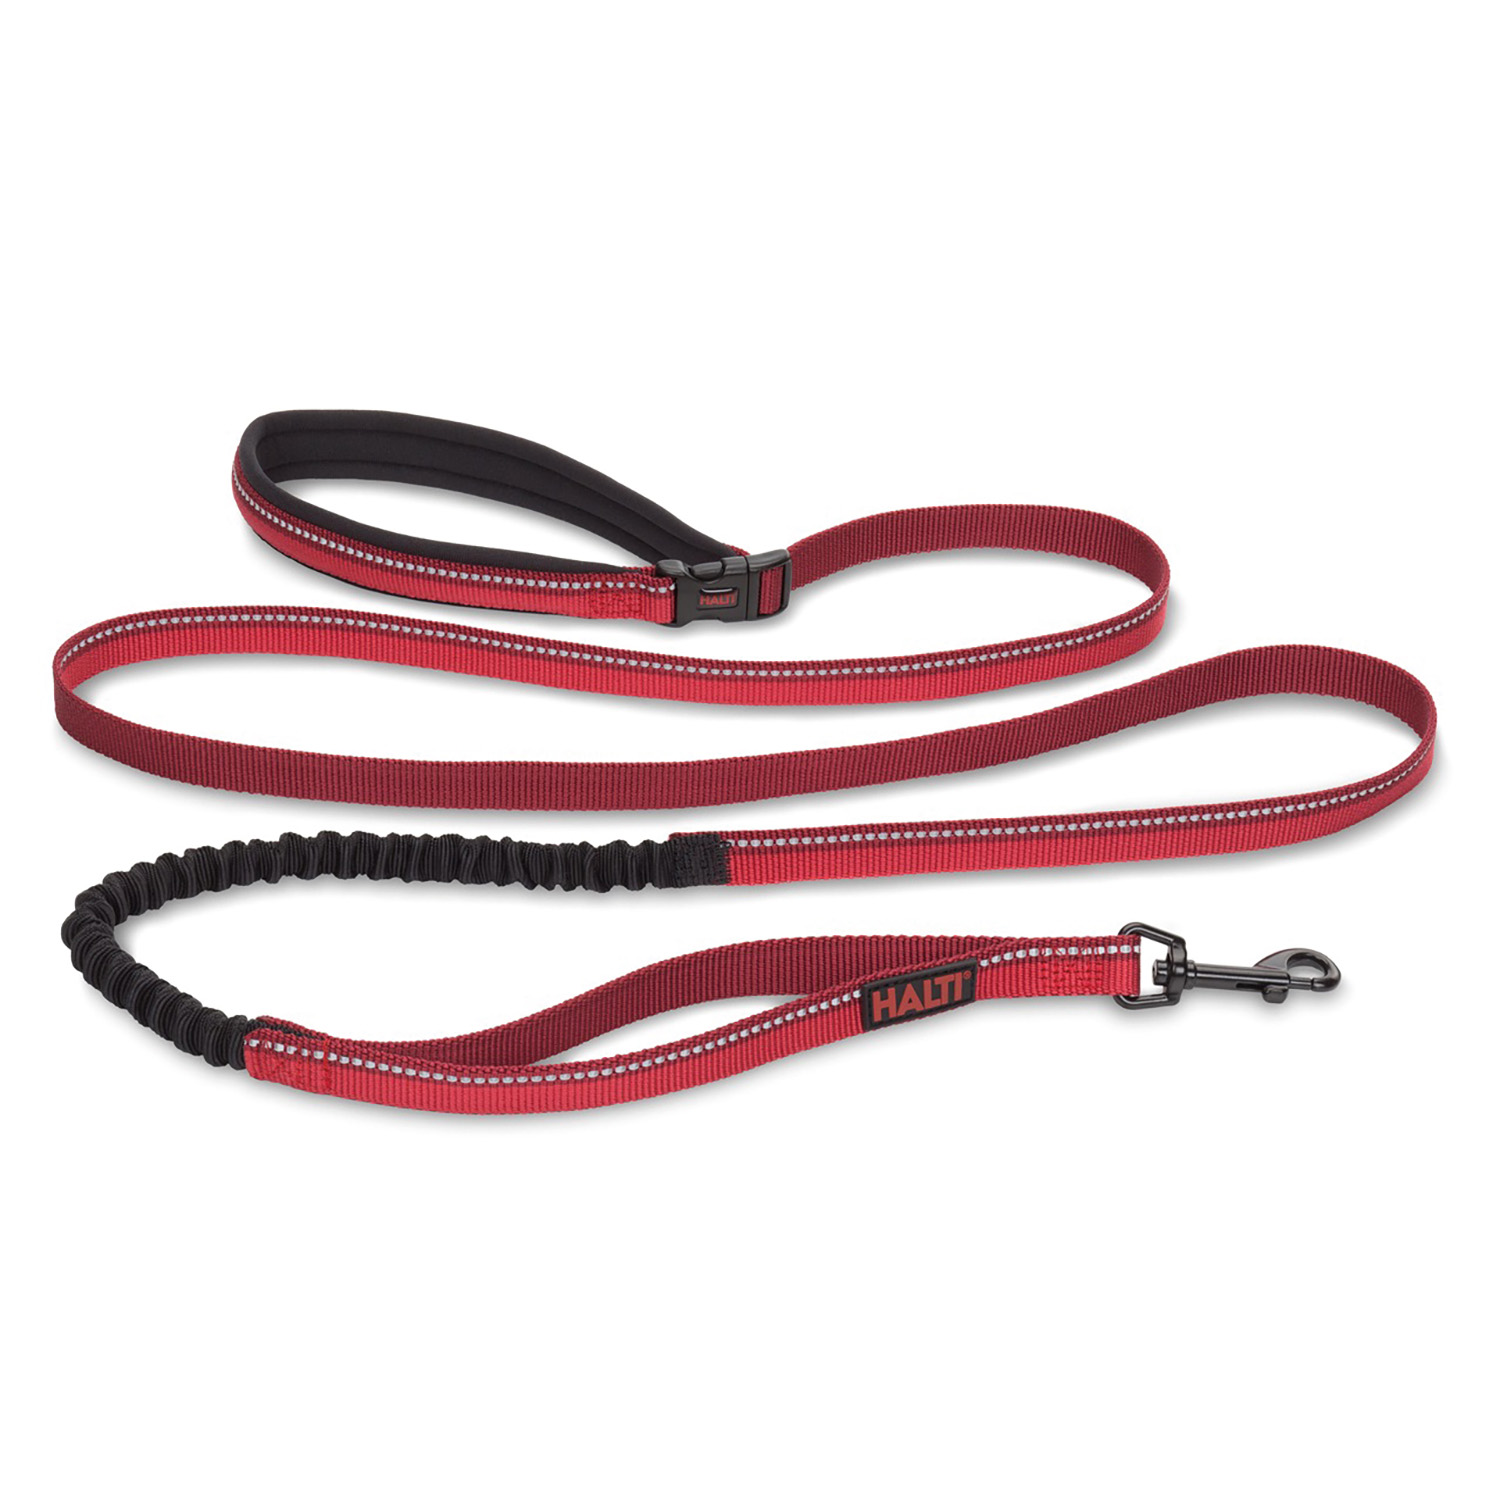 HALTI ACTIVE LEAD RED LARGE LARGE